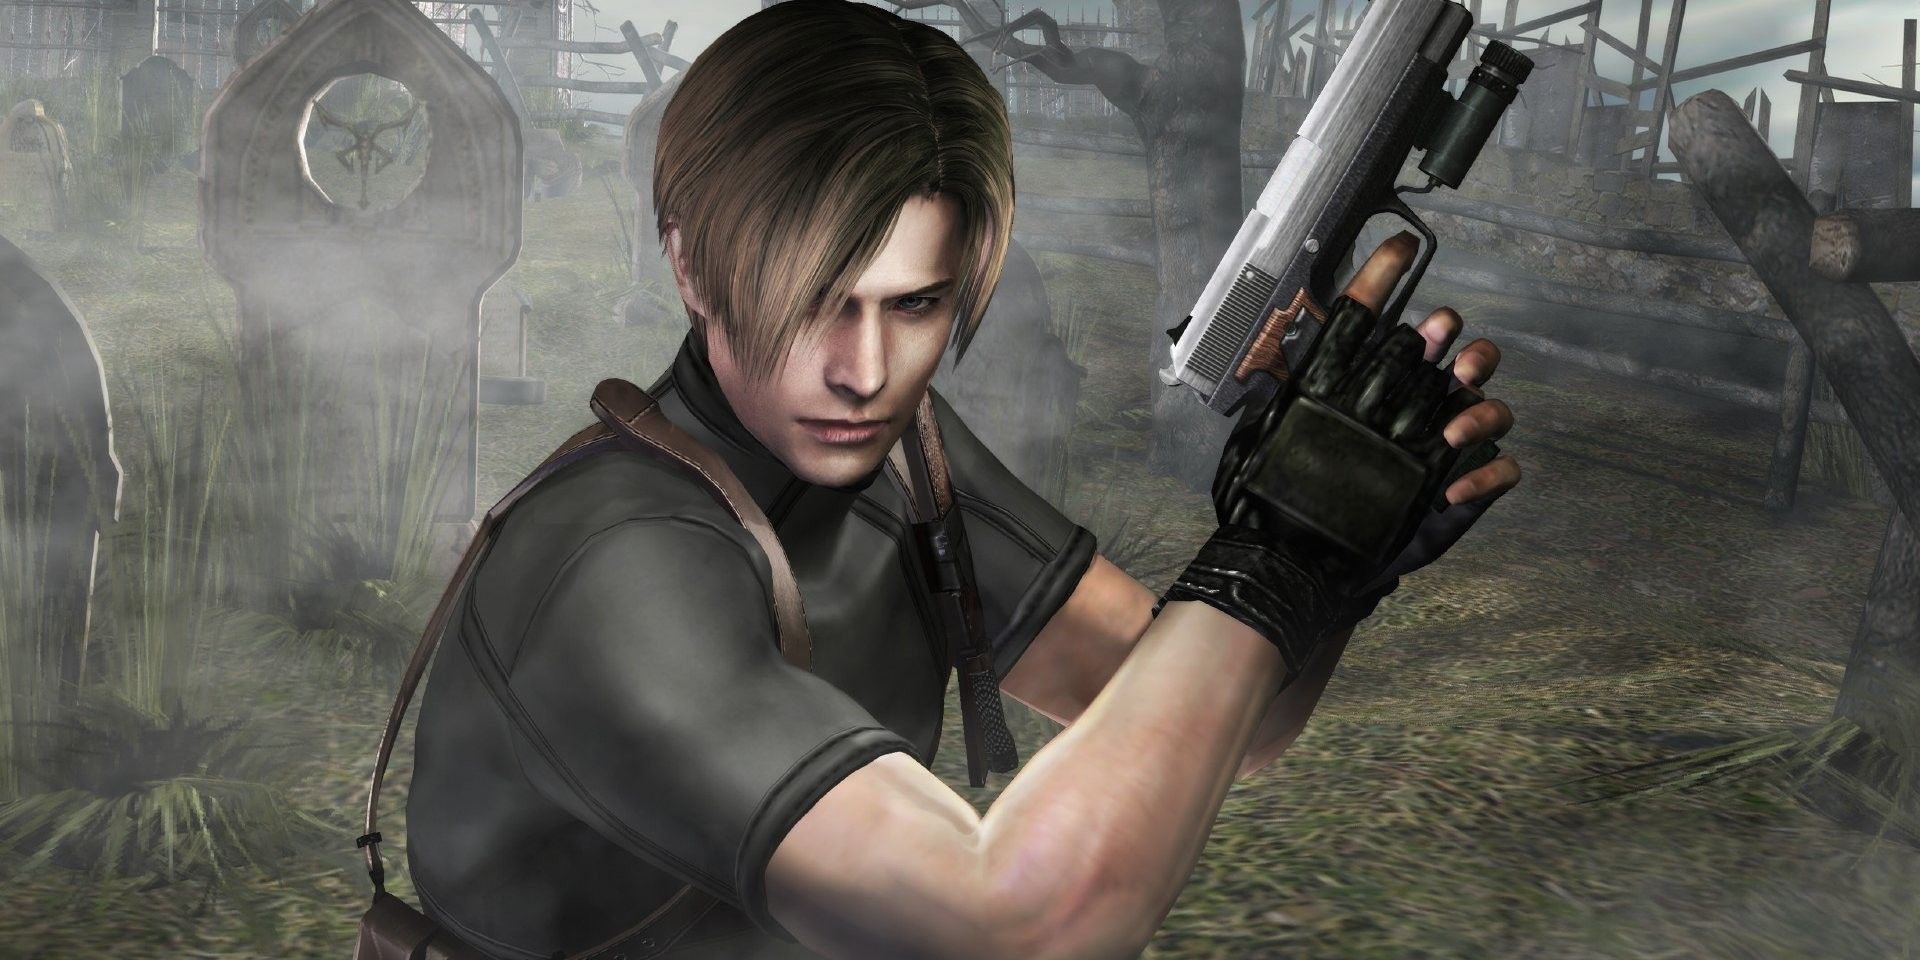 Promotional art of Leon Kennedy from the video game Resident Evil 4.